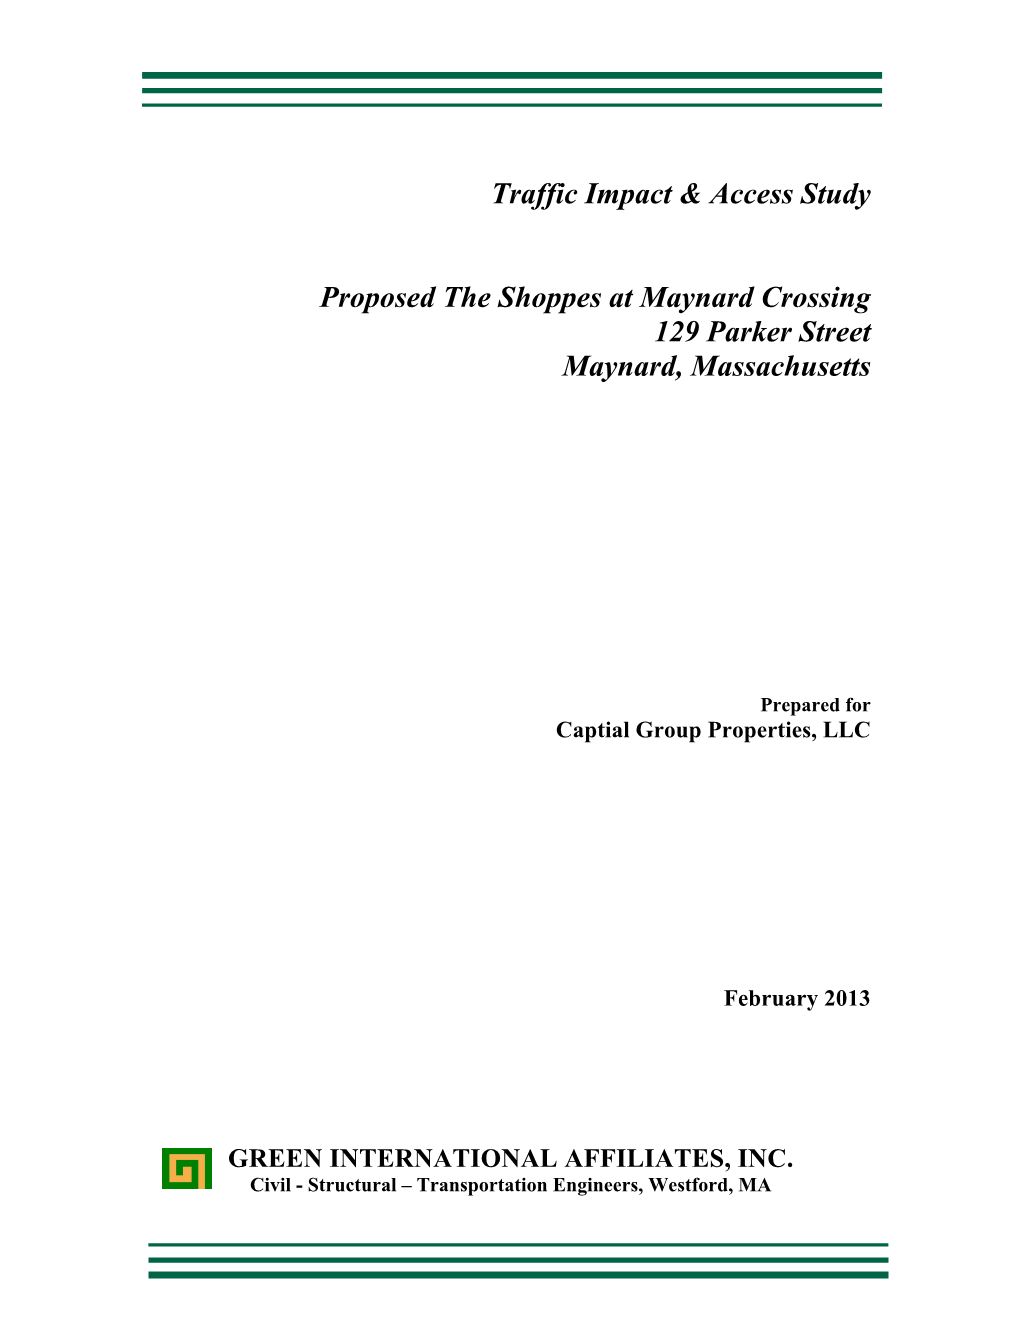 Traffic Impact & Access Study Proposed the Shoppes at Maynard